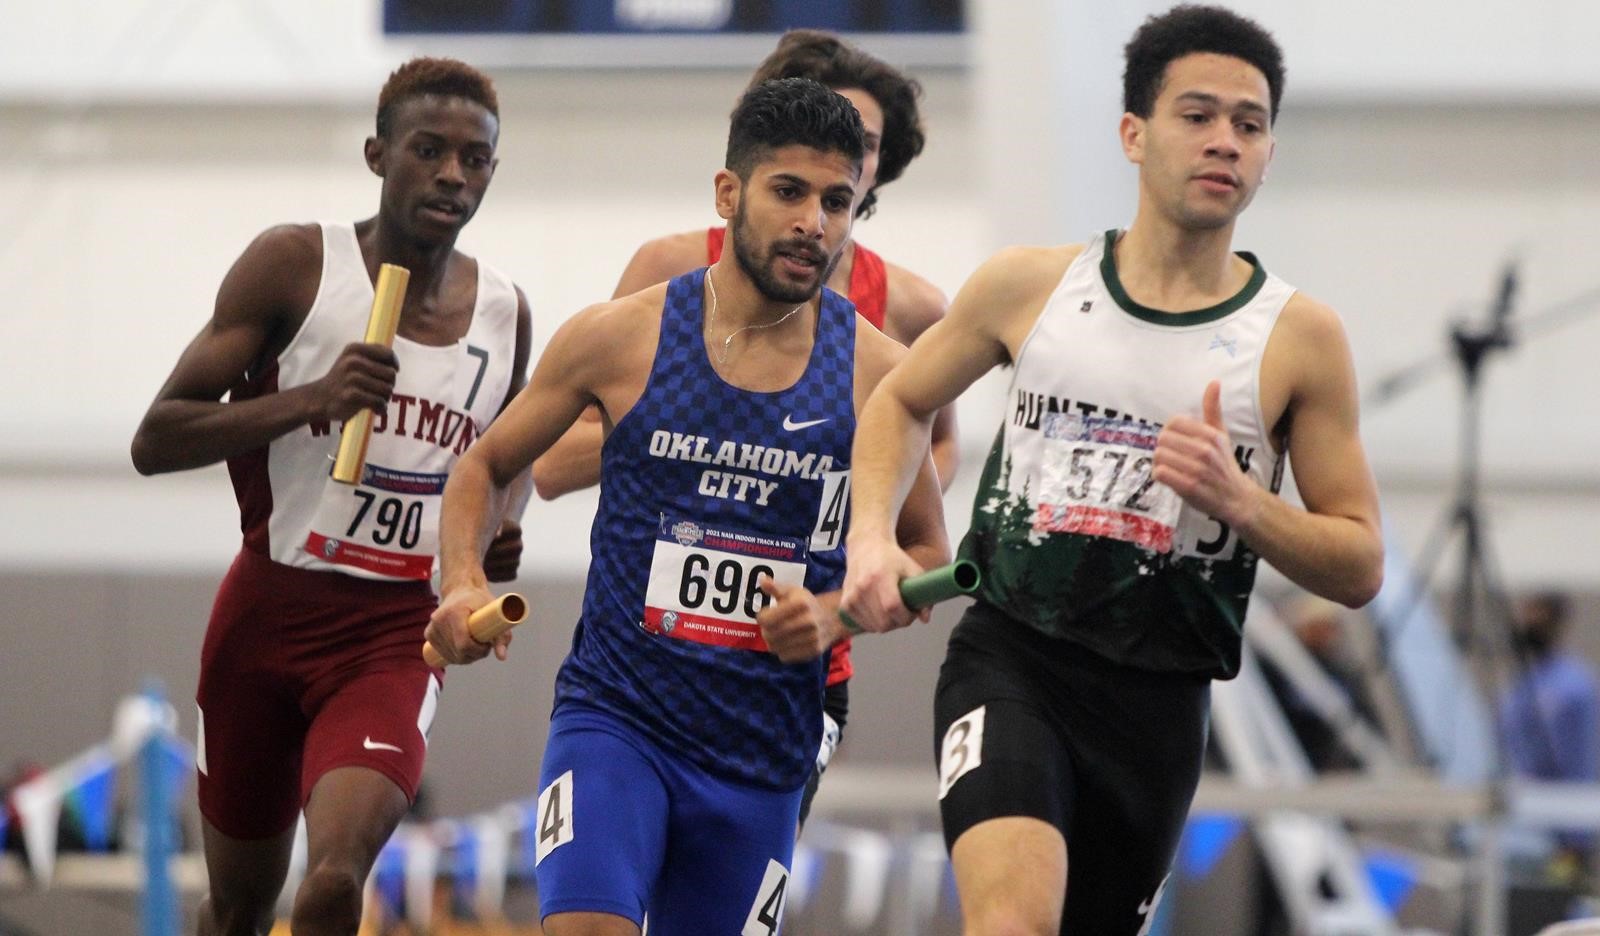 OCU track and field earns highest results in program history at NAIA